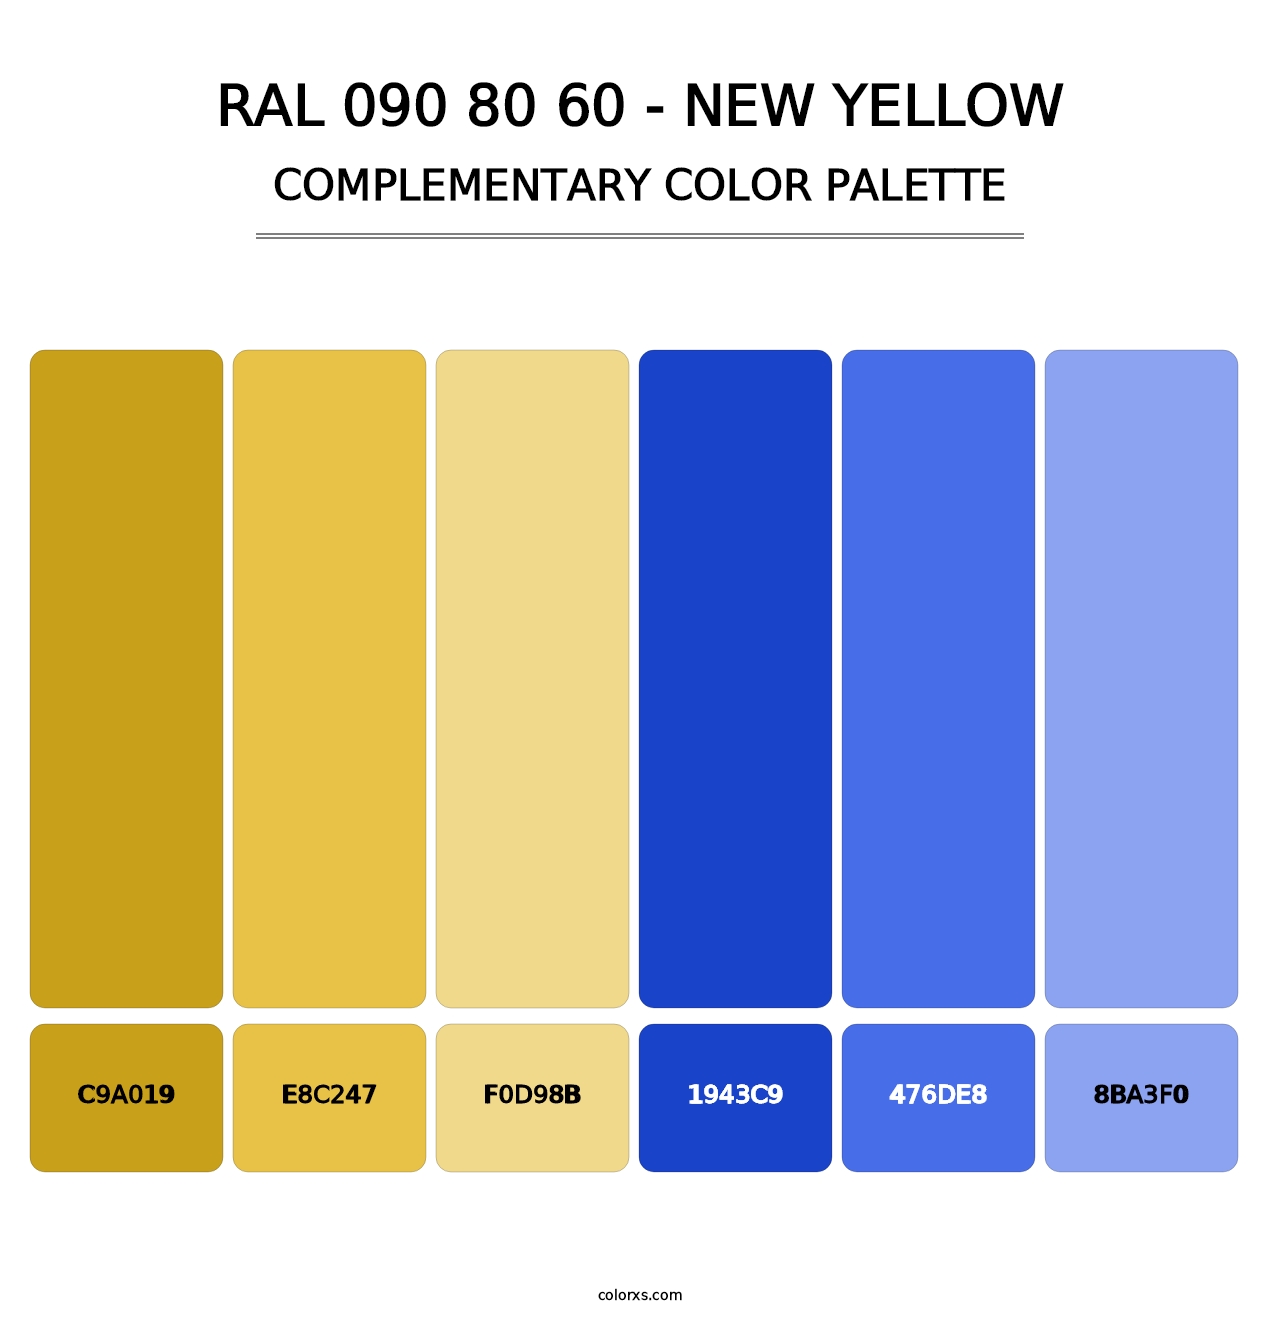 RAL 090 80 60 - New Yellow - Complementary Color Palette